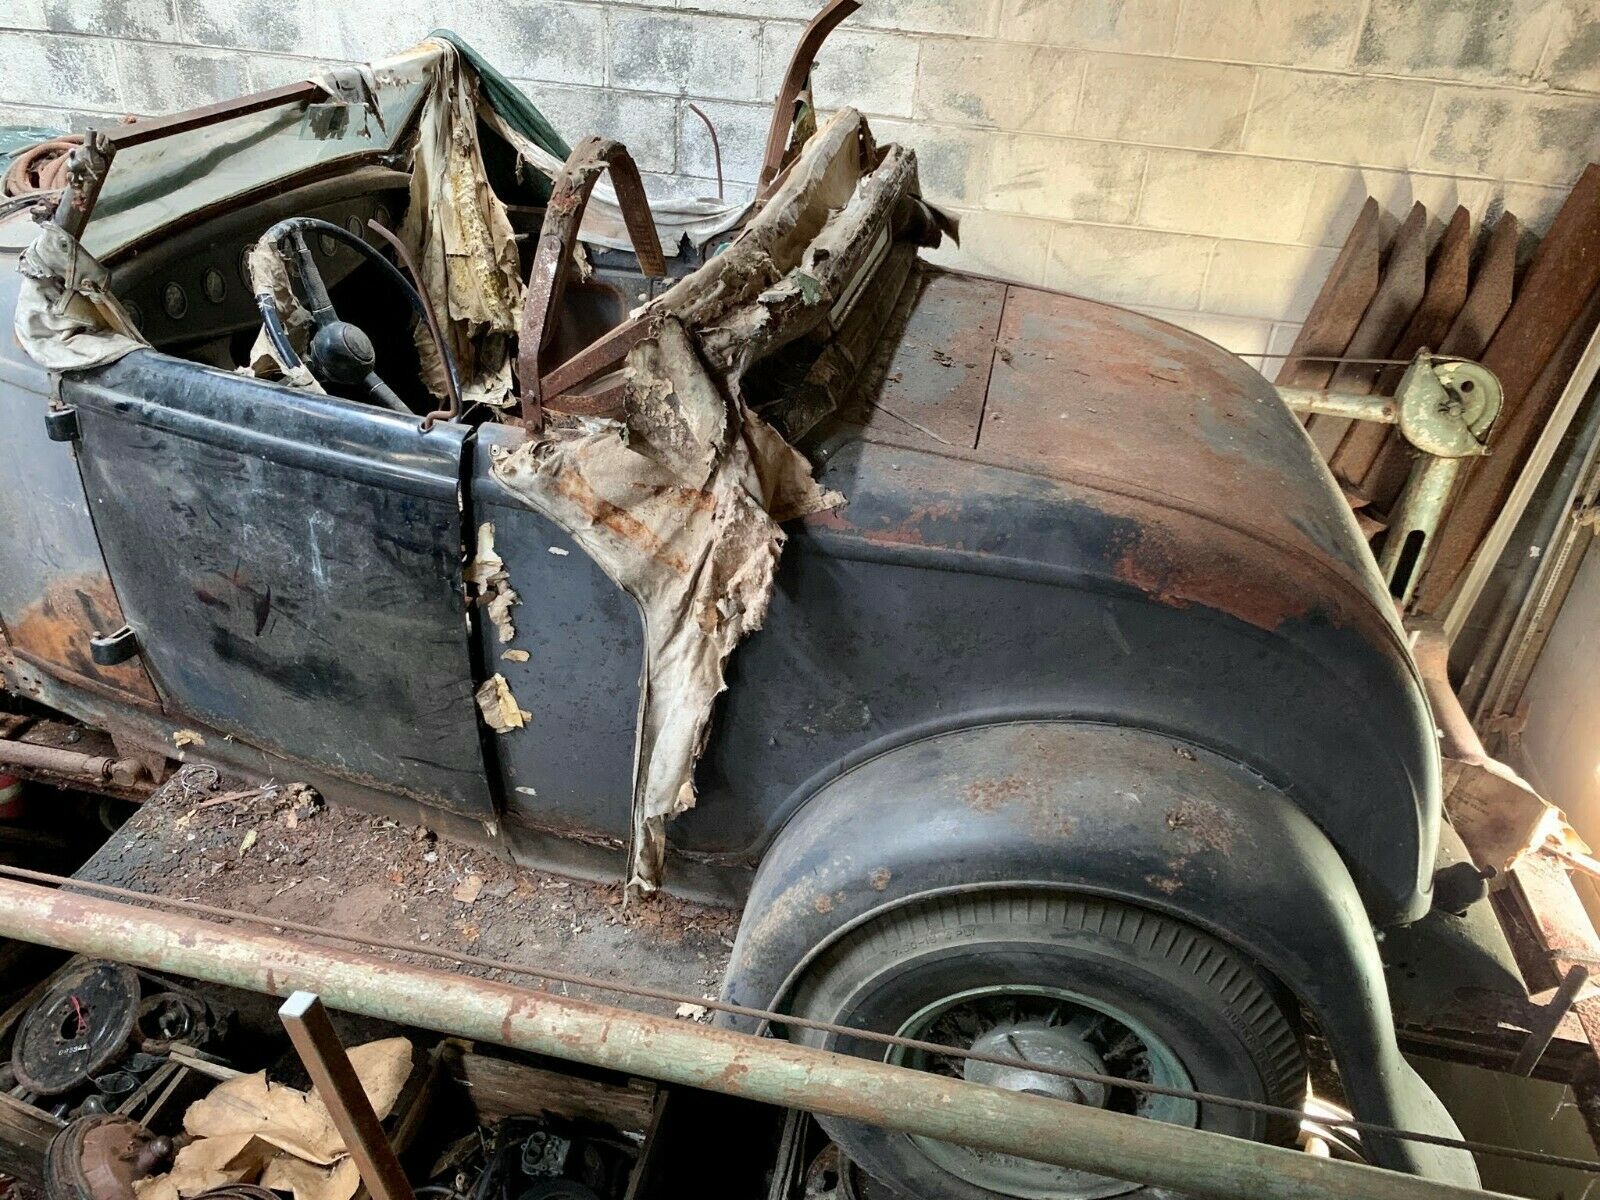 This barn find car for sale needs major work